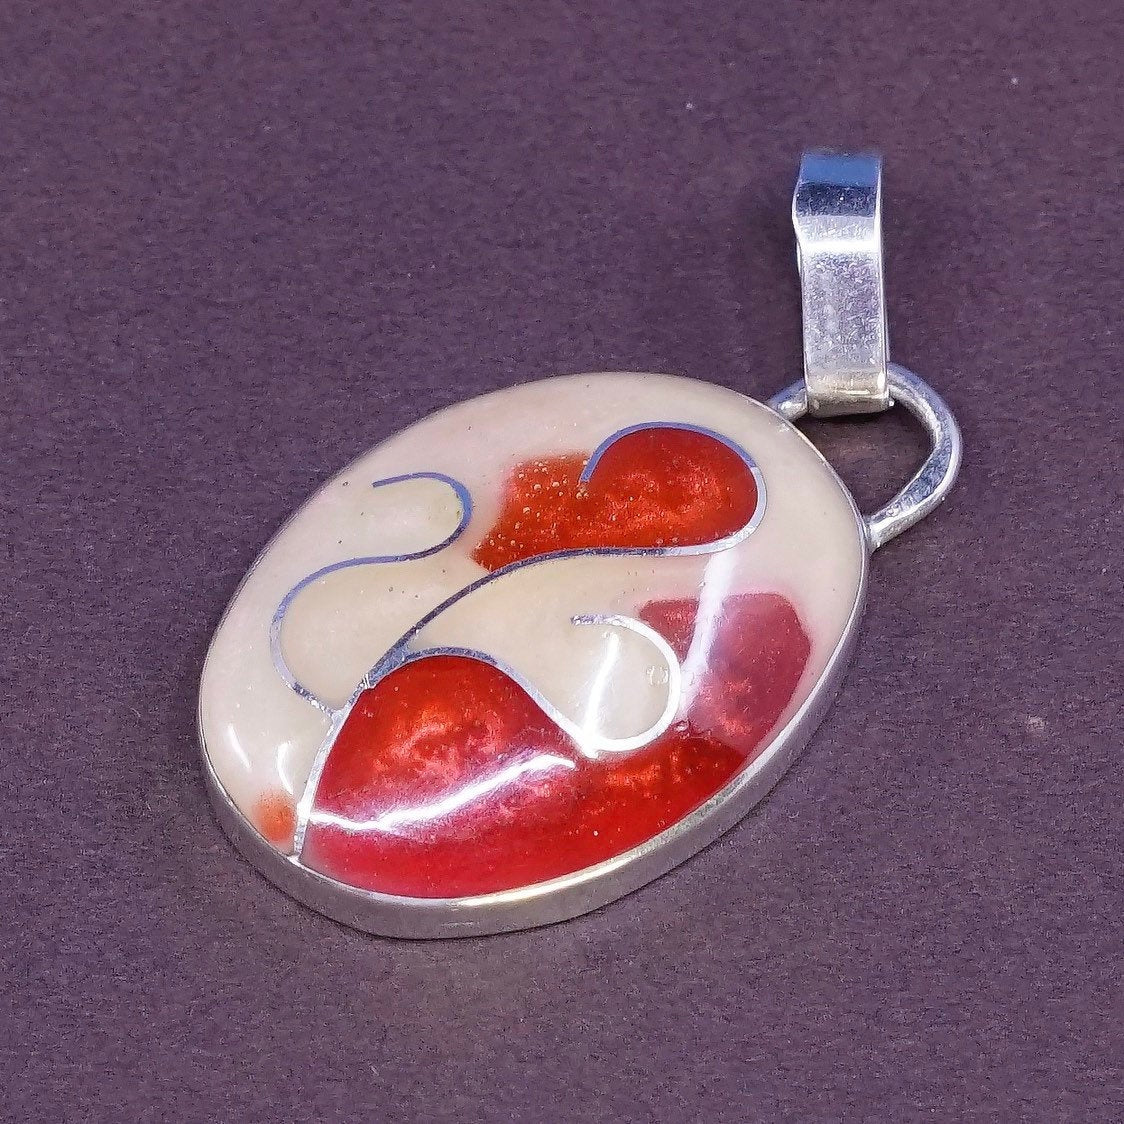 VTG Sterling silver oval shaped pendant, solid 925 silver with resin